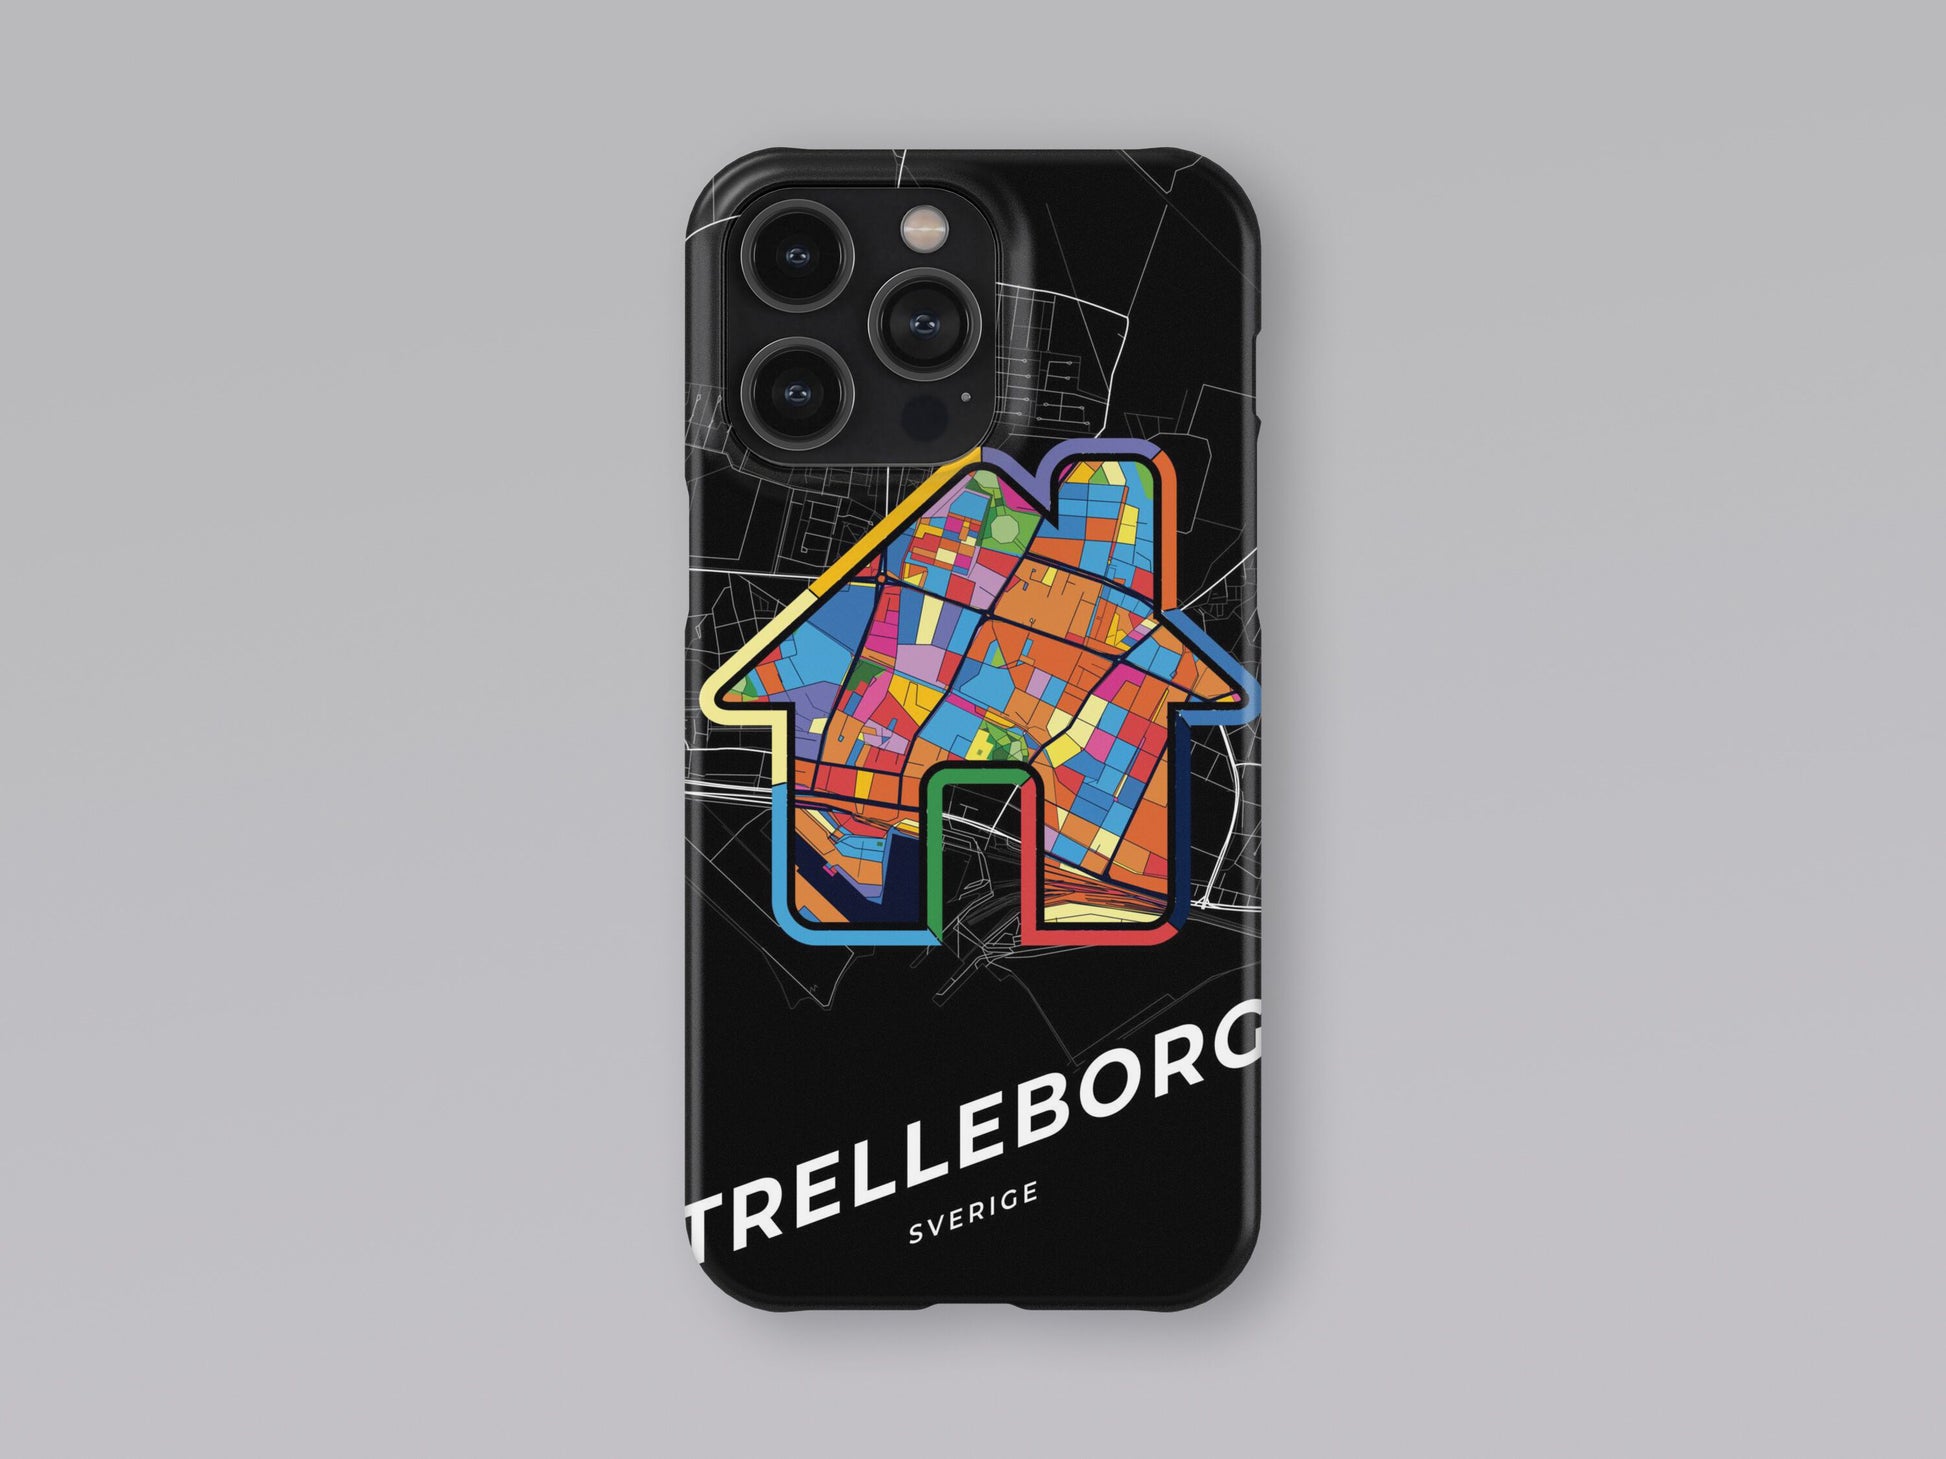 Trelleborg Sweden slim phone case with colorful icon 3